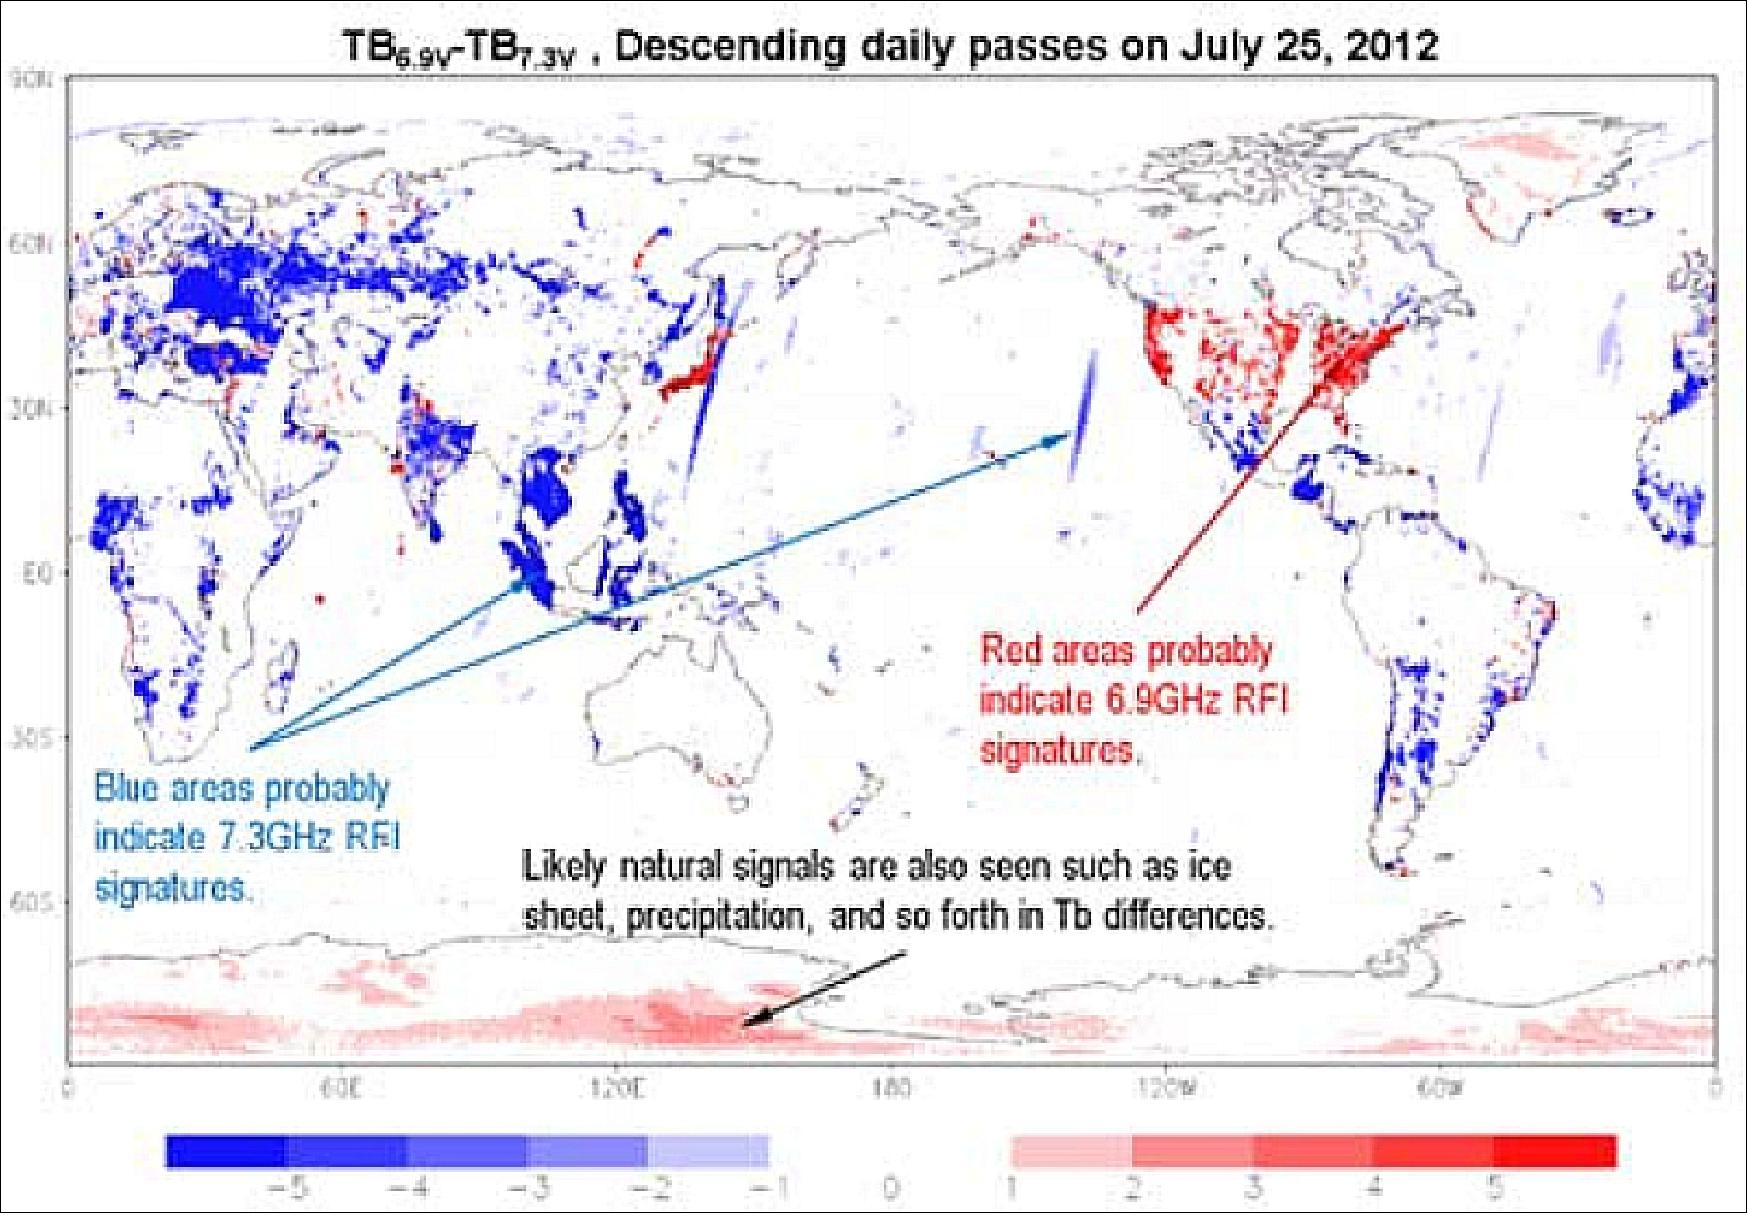 Figure 32: Spatial distribution of AMSR2 Tb difference between 6.925 and 7.3 GHz channels of descending passes on July 25, 2012 (image credit: JAXA)